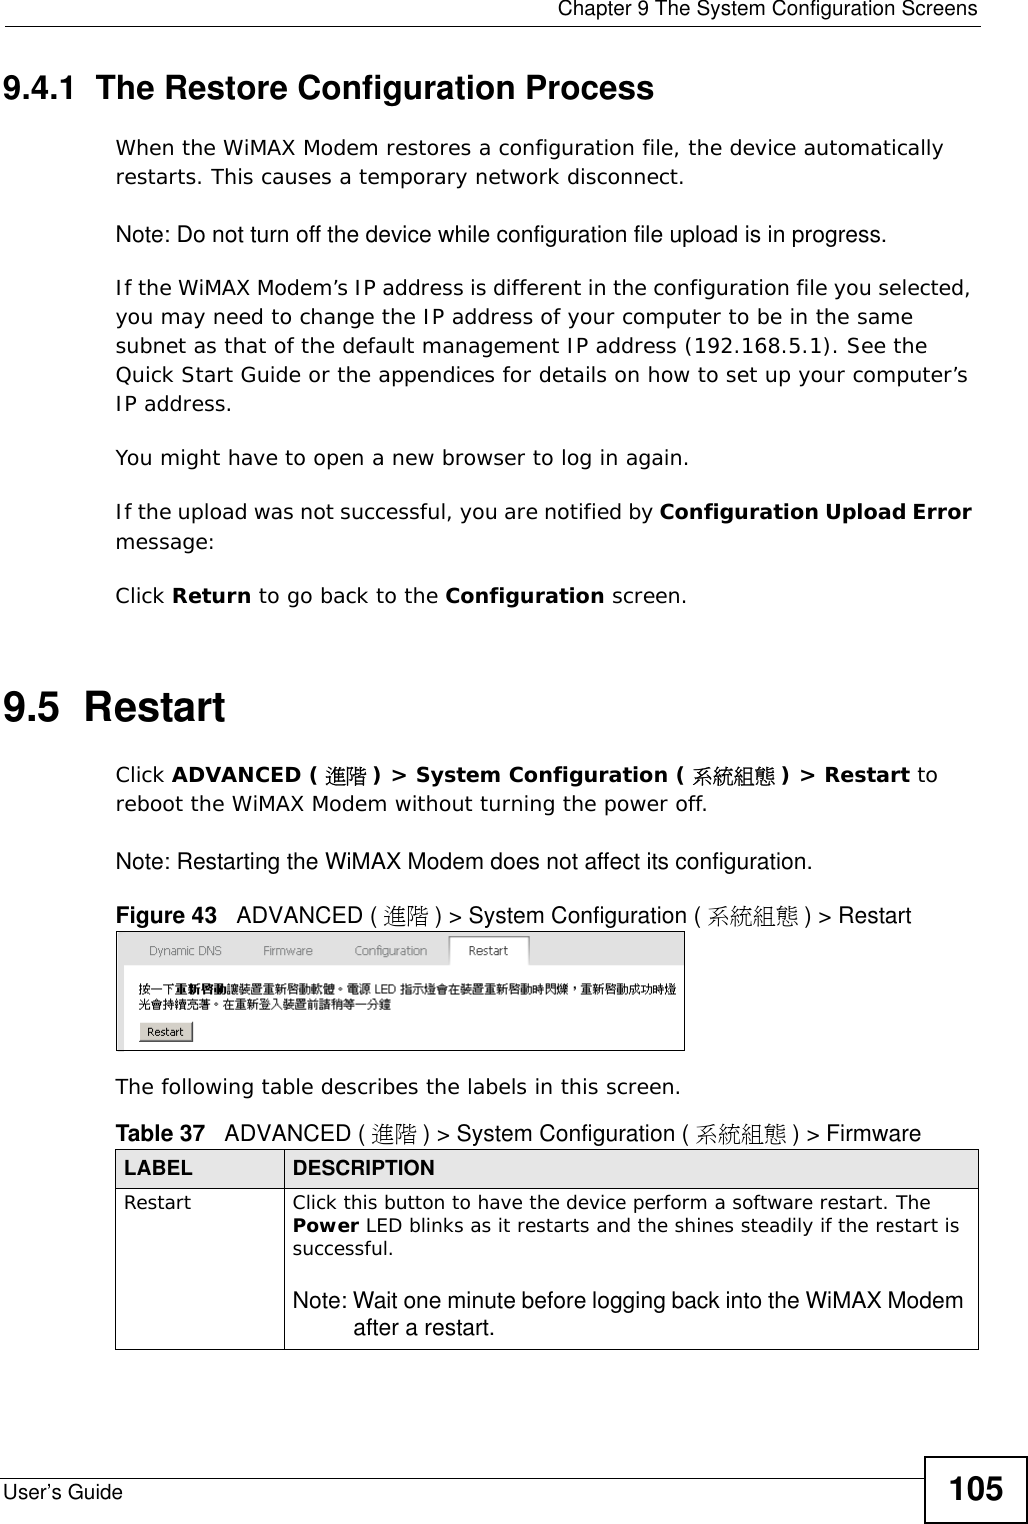  Chapter 9 The System Configuration ScreensUser’s Guide 1059.4.1  The Restore Configuration ProcessWhen the WiMAX Modem restores a configuration file, the device automatically restarts. This causes a temporary network disconnect. Note: Do not turn off the device while configuration file upload is in progress.If the WiMAX Modem’s IP address is different in the configuration file you selected, you may need to change the IP address of your computer to be in the same subnet as that of the default management IP address (192.168.5.1). See the Quick Start Guide or the appendices for details on how to set up your computer’s IP address.You might have to open a new browser to log in again.If the upload was not successful, you are notified by Configuration Upload Error message:Click Return to go back to the Configuration screen.9.5  RestartClick ADVANCED ( 進階 ) &gt; System Configuration ( 系統組態 ) &gt; Restart to reboot the WiMAX Modem without turning the power off.Note: Restarting the WiMAX Modem does not affect its configuration.Figure 43   ADVANCED ( 進階 ) &gt; System Configuration ( 系統組態 ) &gt; RestartThe following table describes the labels in this screen.    Table 37   ADVANCED ( 進階 ) &gt; System Configuration ( 系統組態 ) &gt; FirmwareLABEL DESCRIPTIONRestart  Click this button to have the device perform a software restart. The Power LED blinks as it restarts and the shines steadily if the restart is successful.Note: Wait one minute before logging back into the WiMAX Modem after a restart.